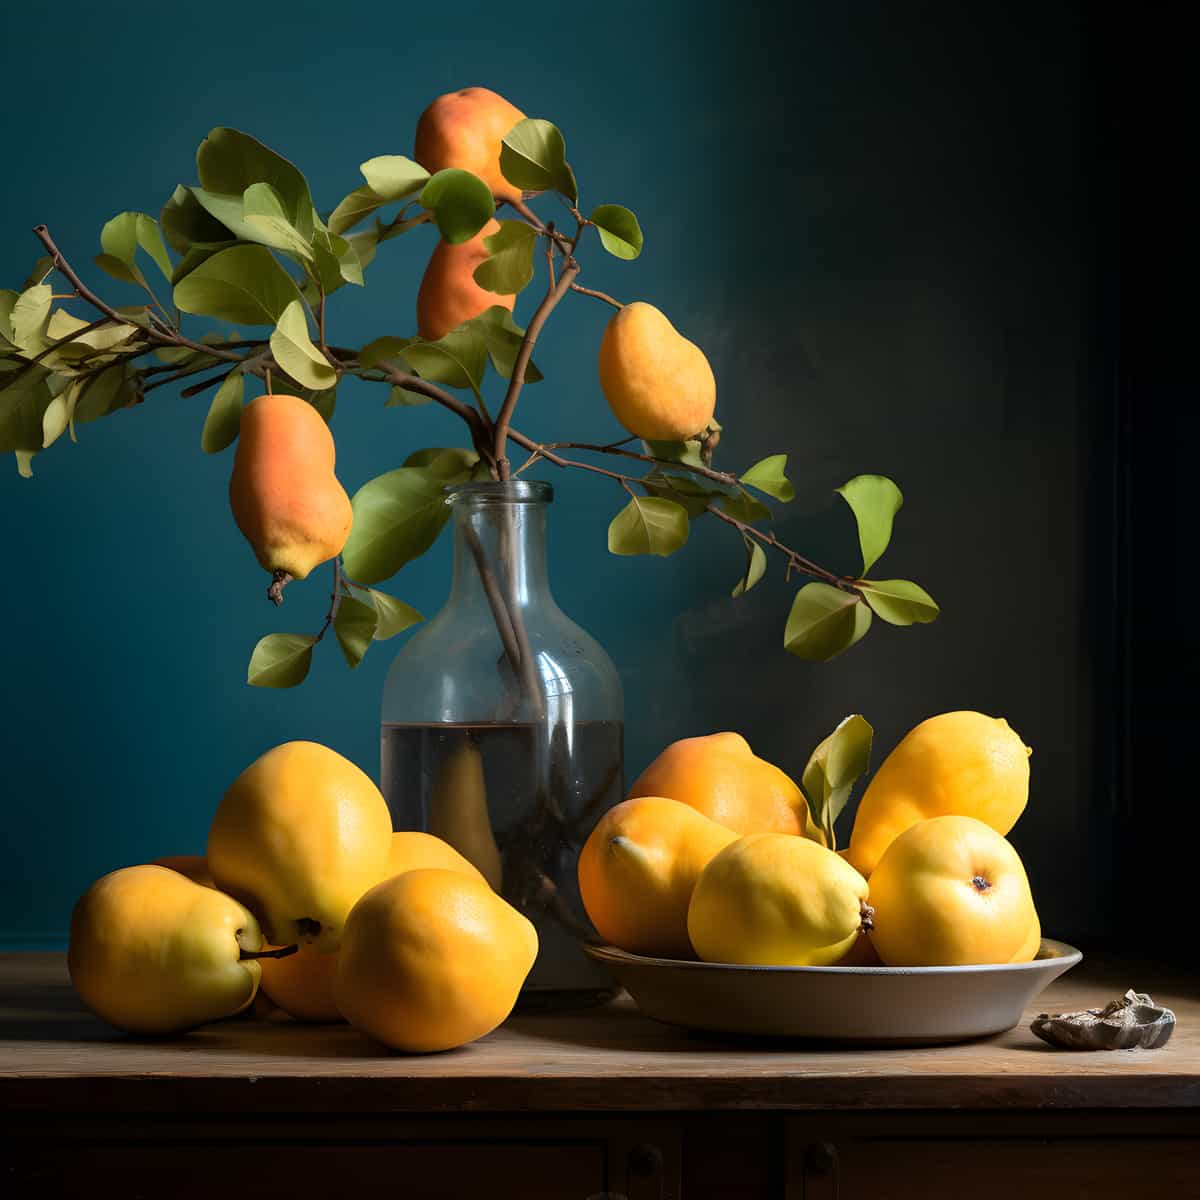 Chinese Quince on a kitchen counter